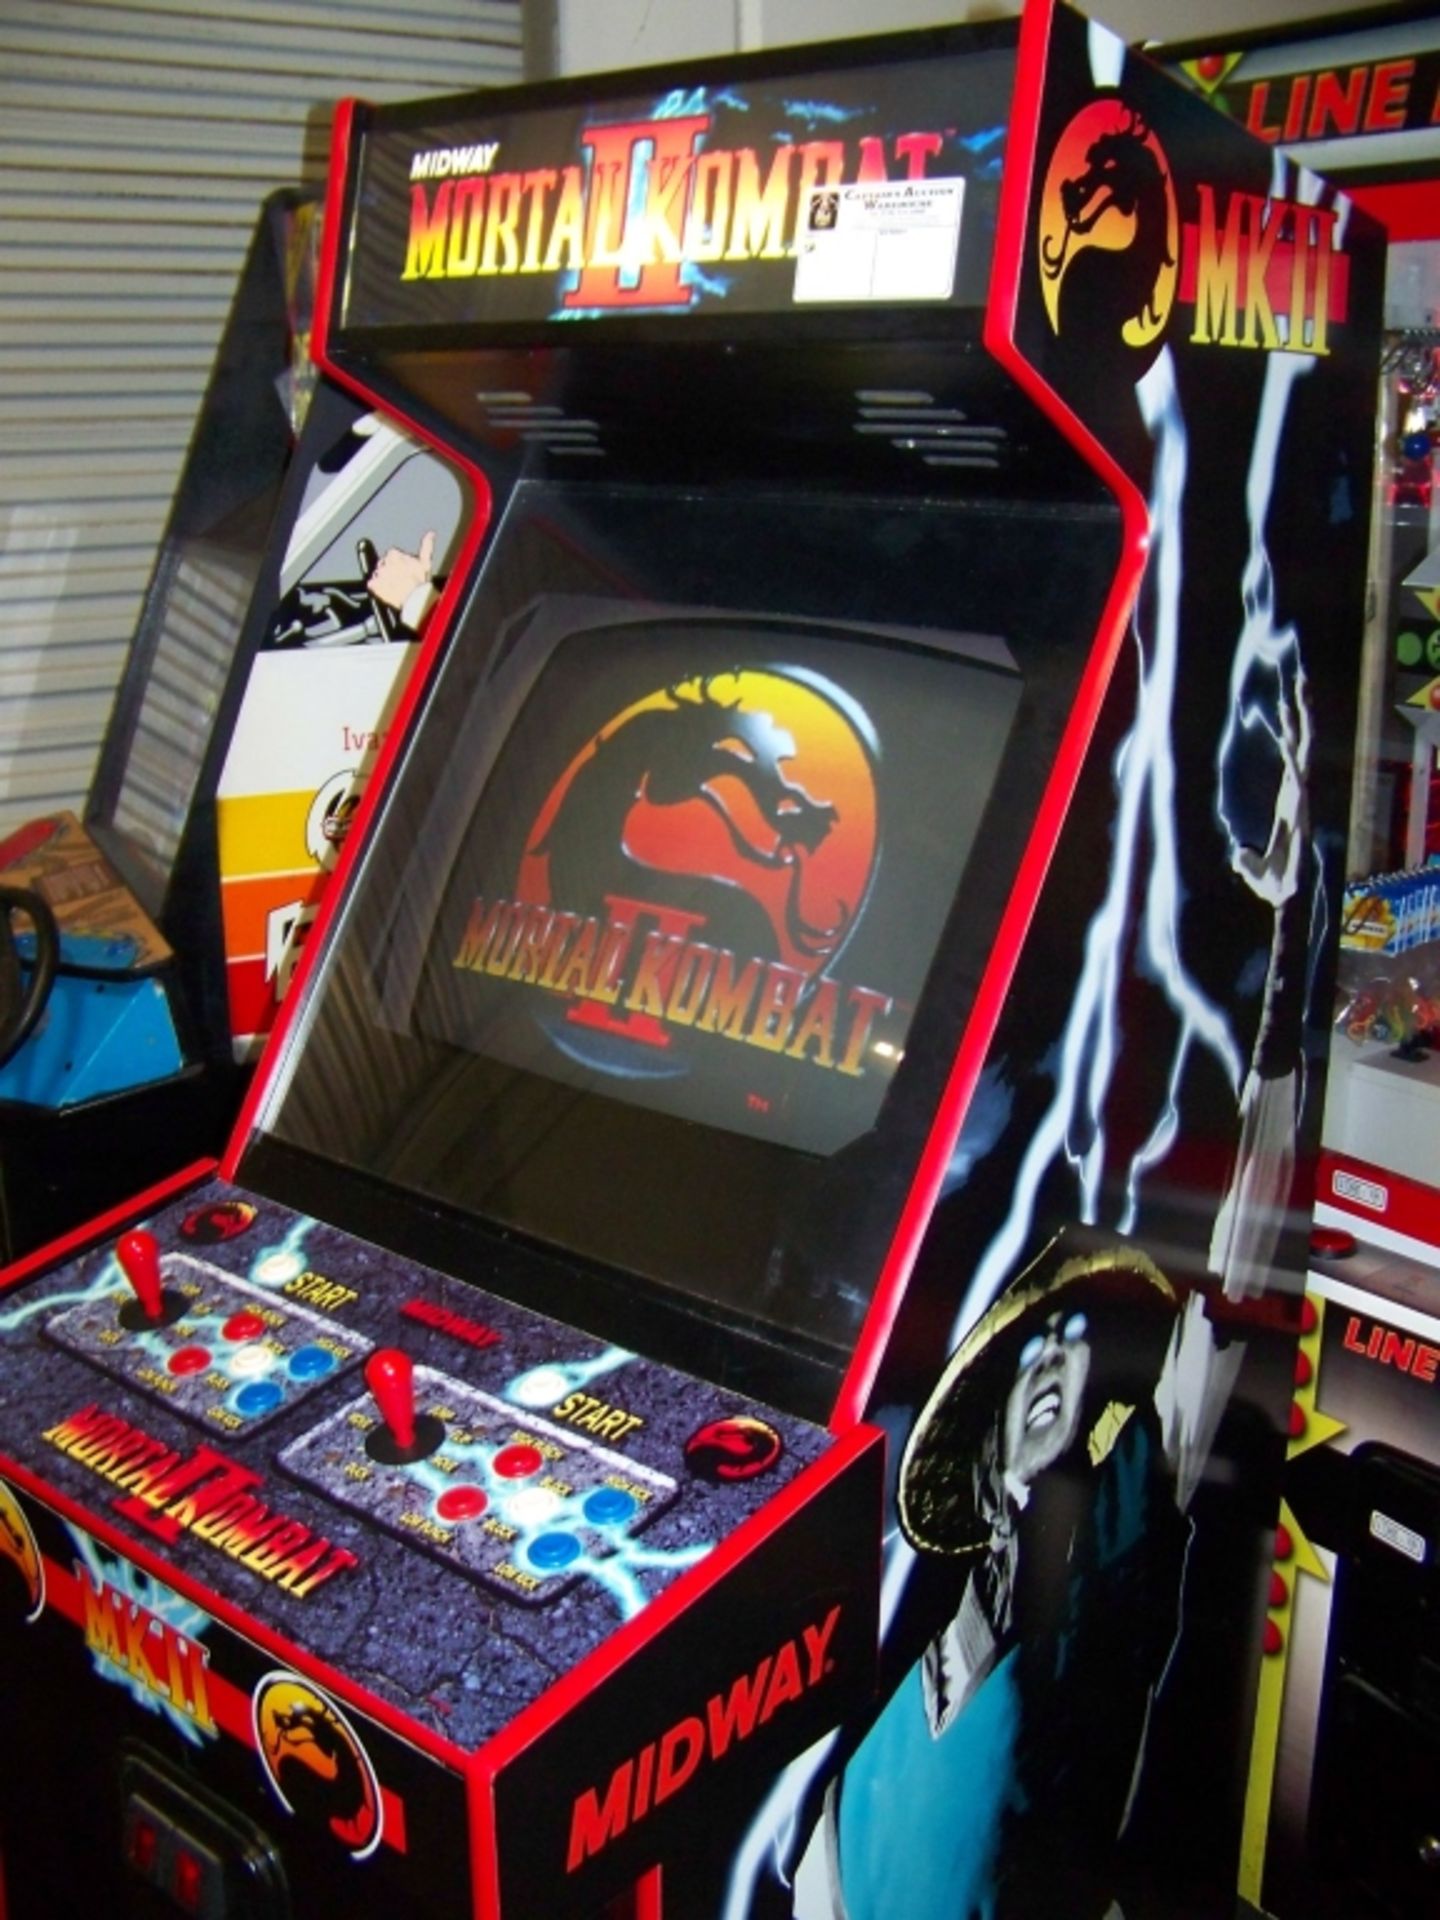 MORTAL KOMBAT II ARCADE GAME MIDWAY Item is in used condition. Evidence of wear and commercial - Image 6 of 8